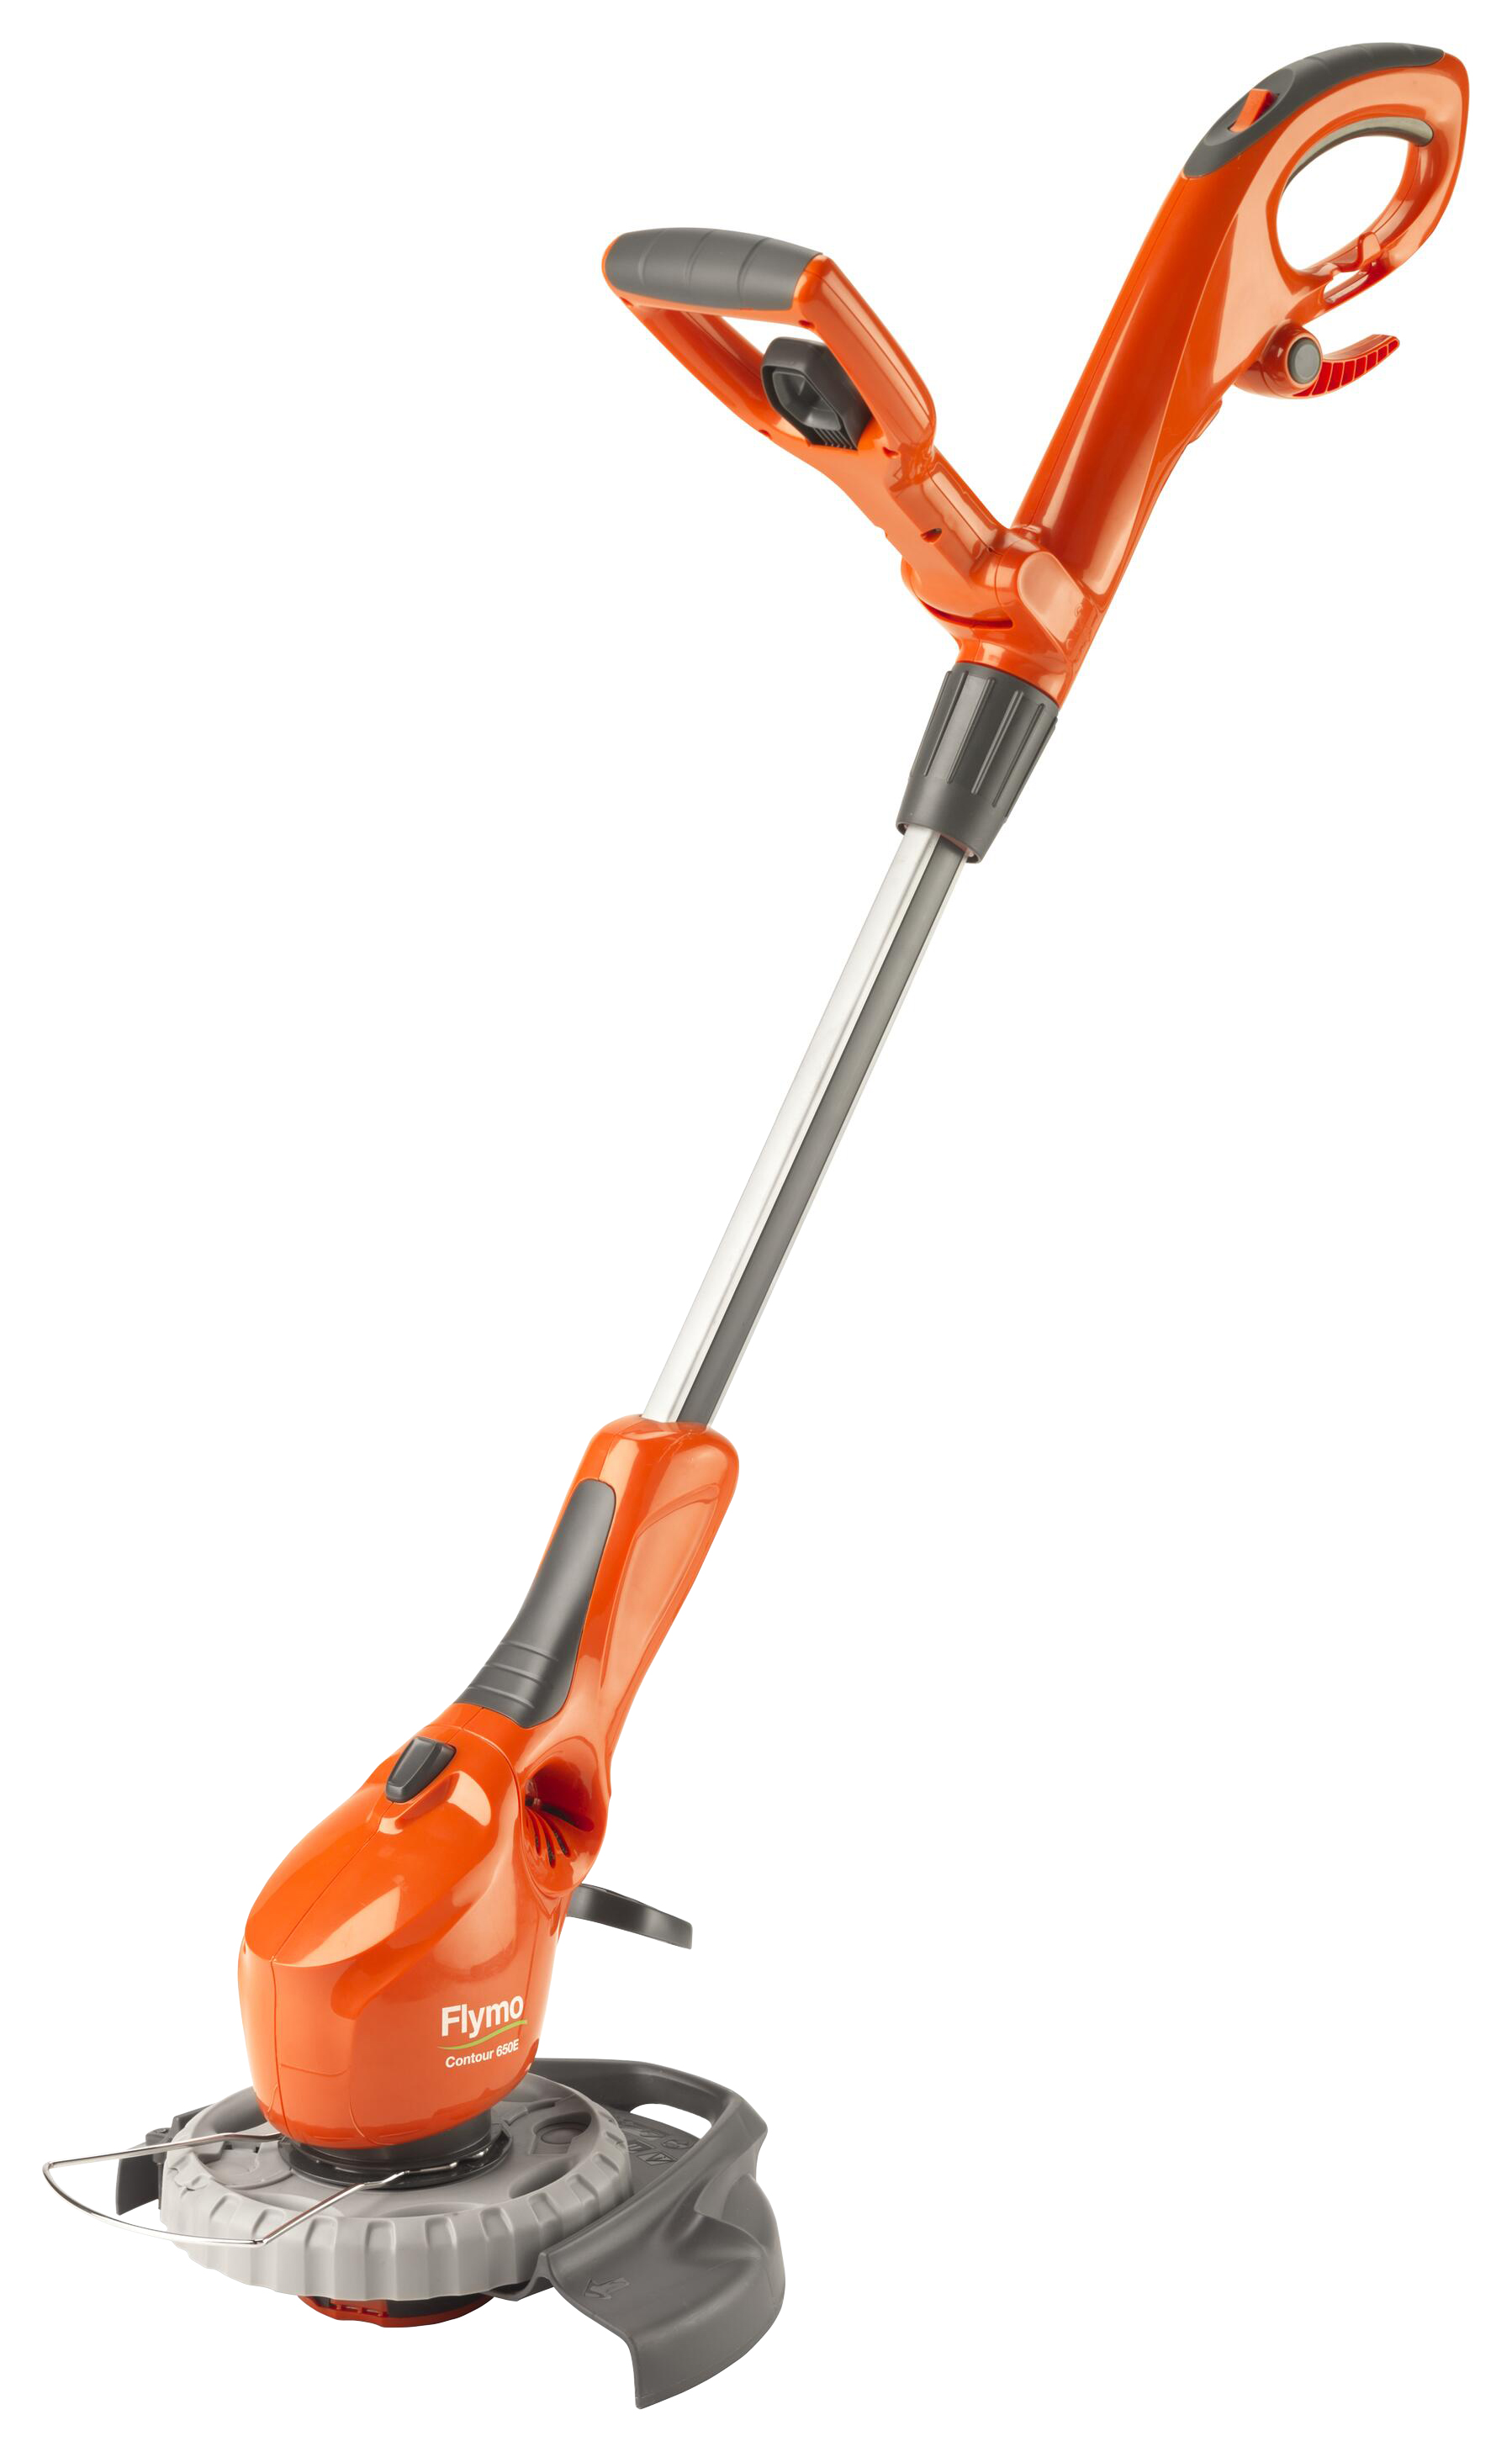 Flymo Contour 650E Corded 3-in-1 Grass Trimmer - 650W